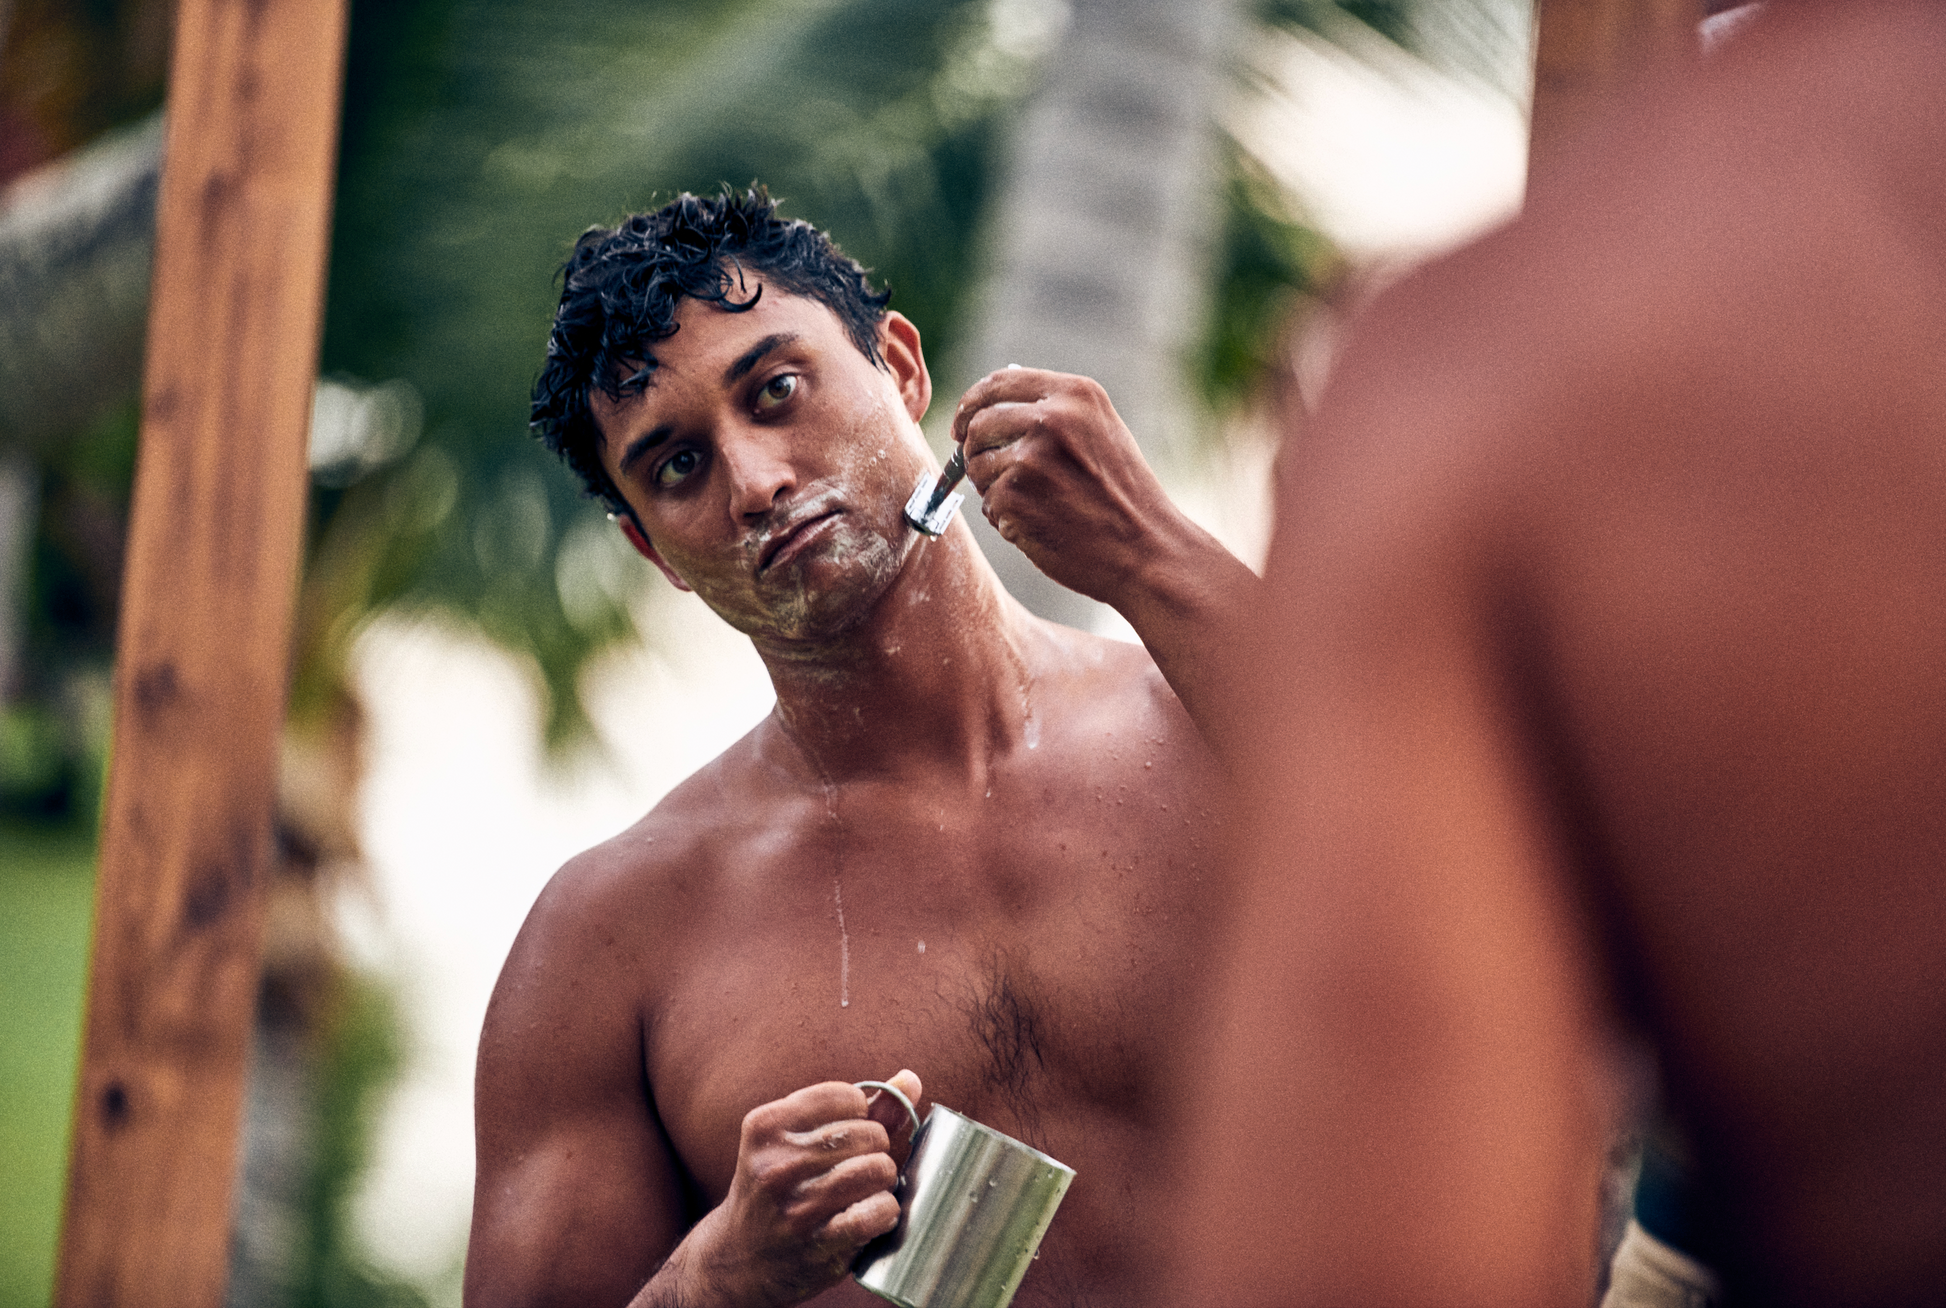 This image shows a metal reusable safety razor for body and face shaving as a plastic free alternative to disposable razors. It comes with replacement blades. It is designed for eco friendly zero waste plastic free more sustainable shaving. In the image a man is using the metal safety razor to shave his face